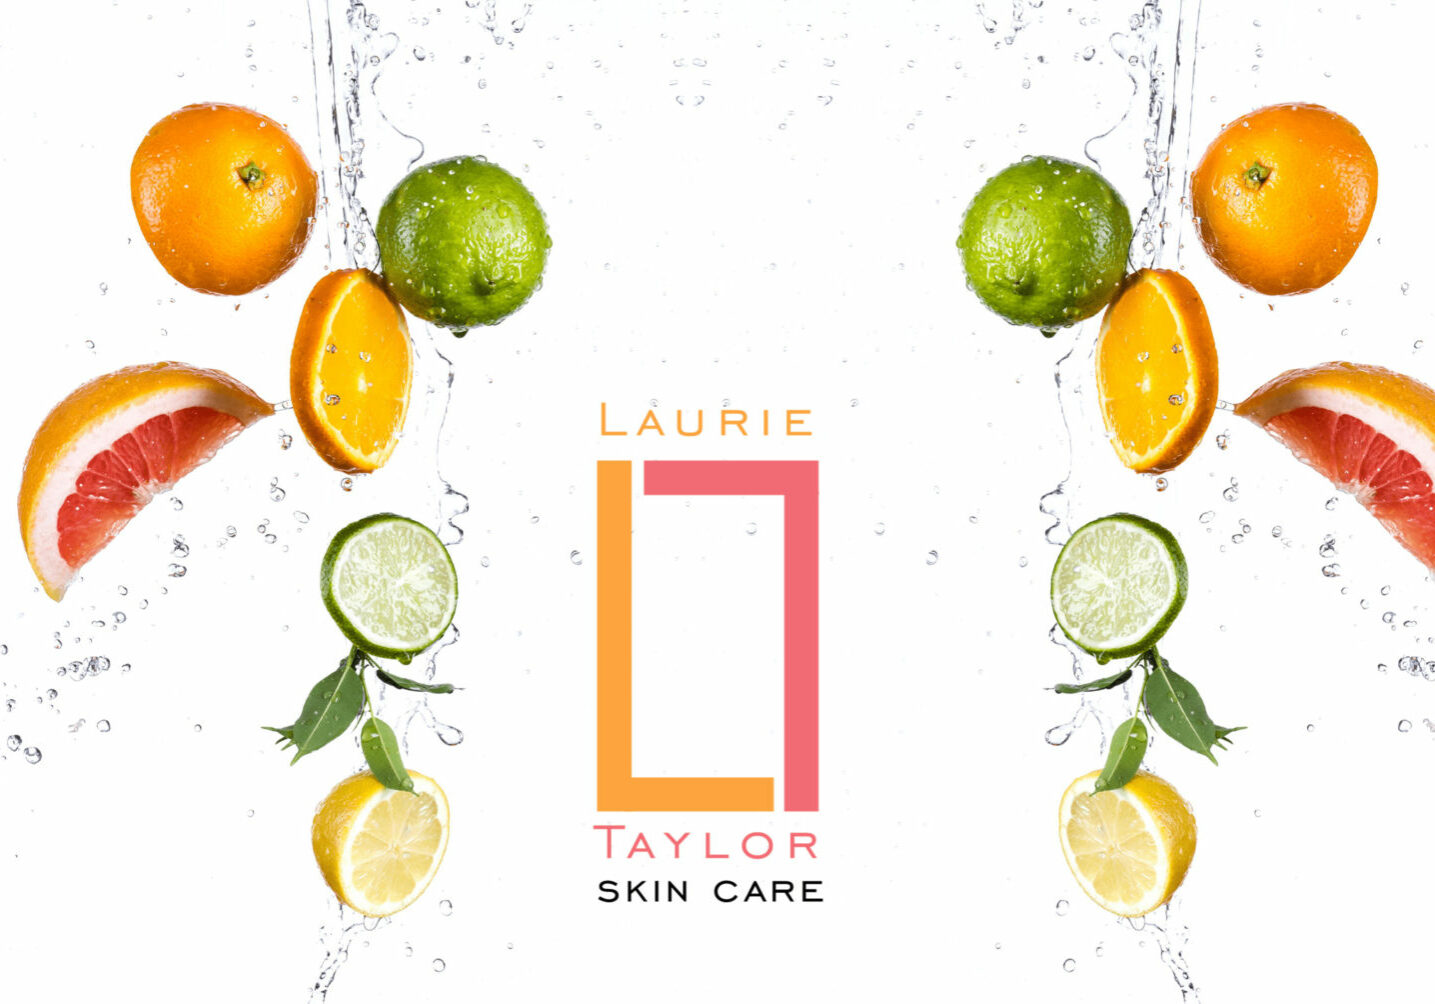 Laurie Taylor Skin Care About page